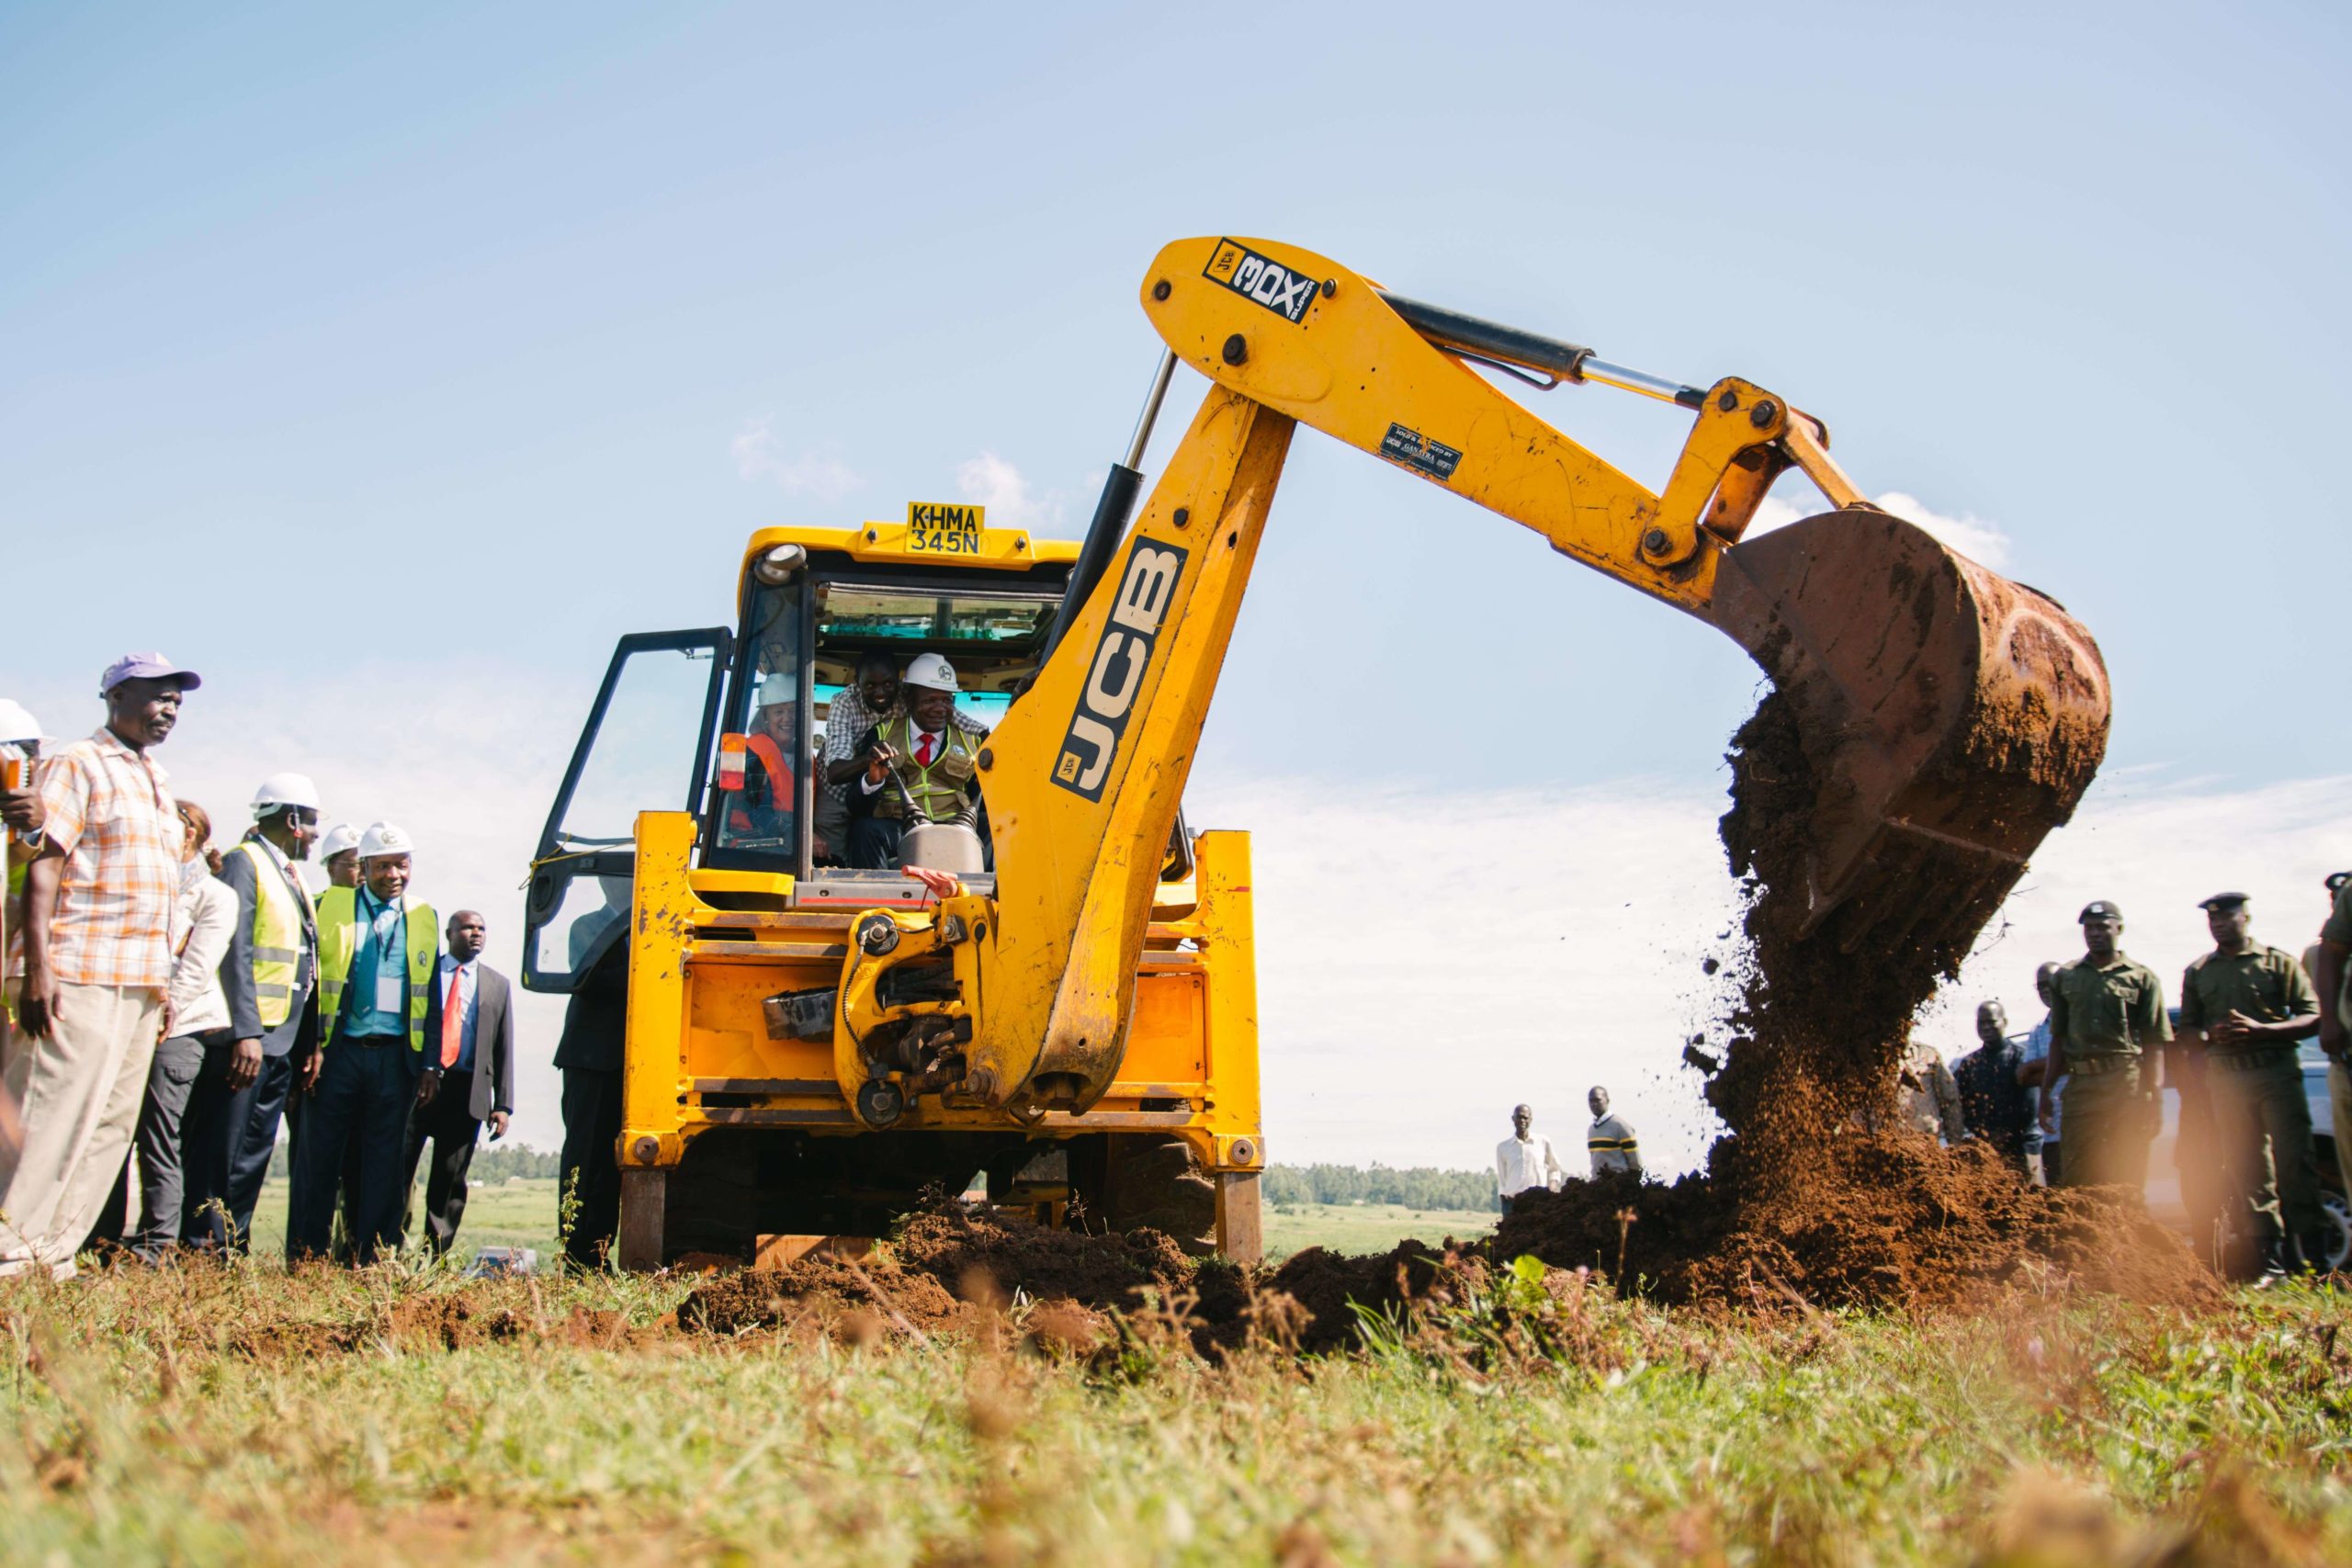 Scaling the Regenerative Agriculture Revolution: Groundbreaking for Construction of First Ever Organic Fertilizer Manufacturing Plant in Kakamega County